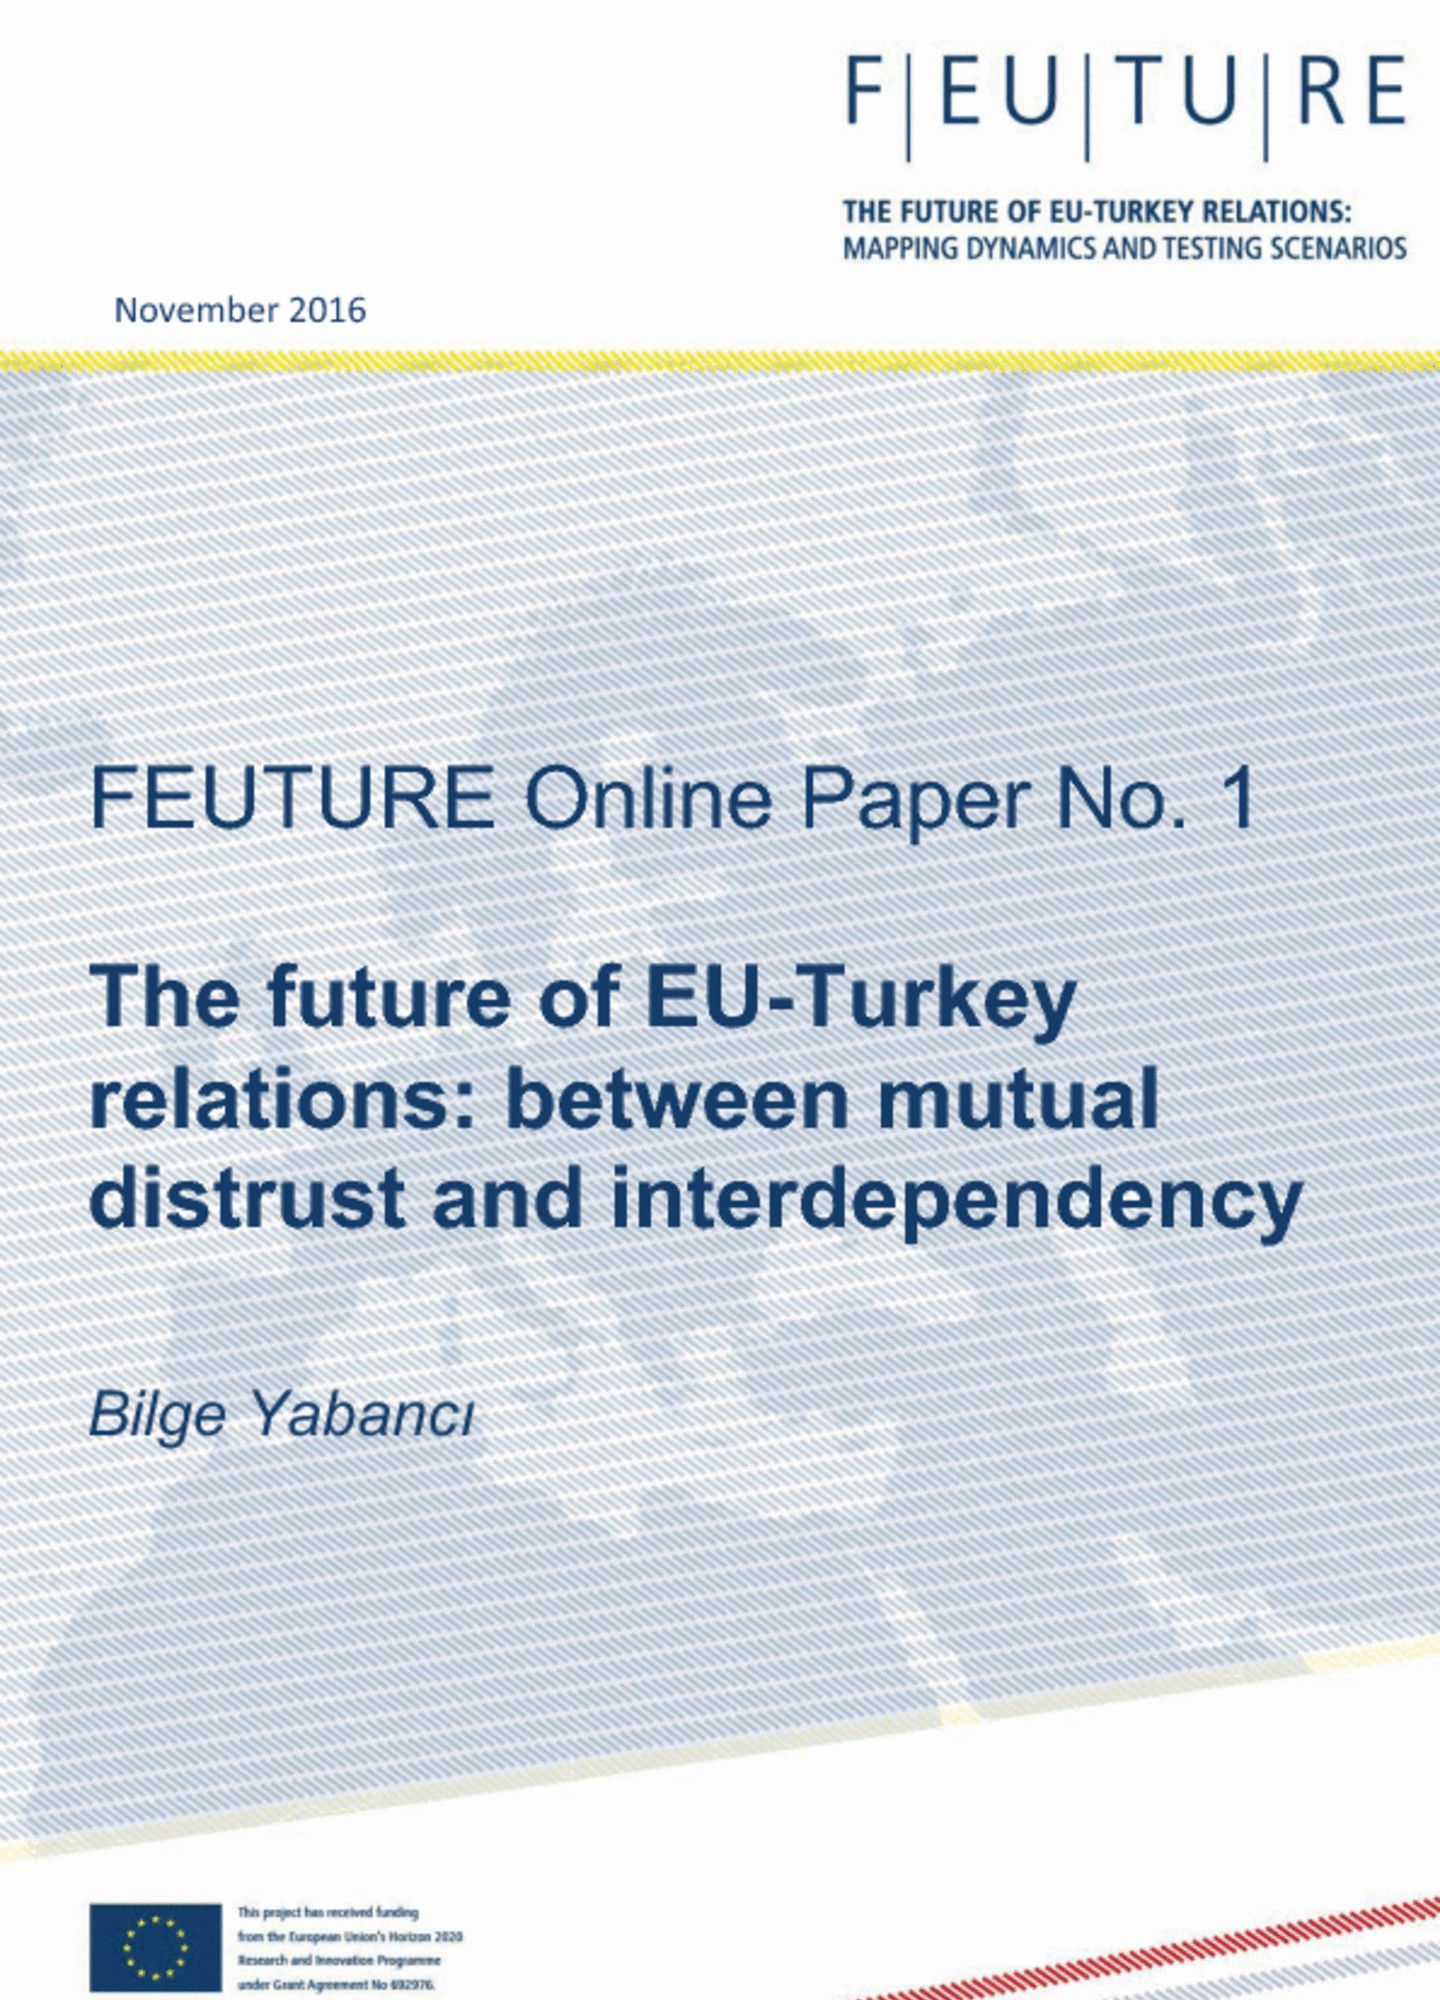 The future of EU-Turkey relations: between mutual distrust and interdependency